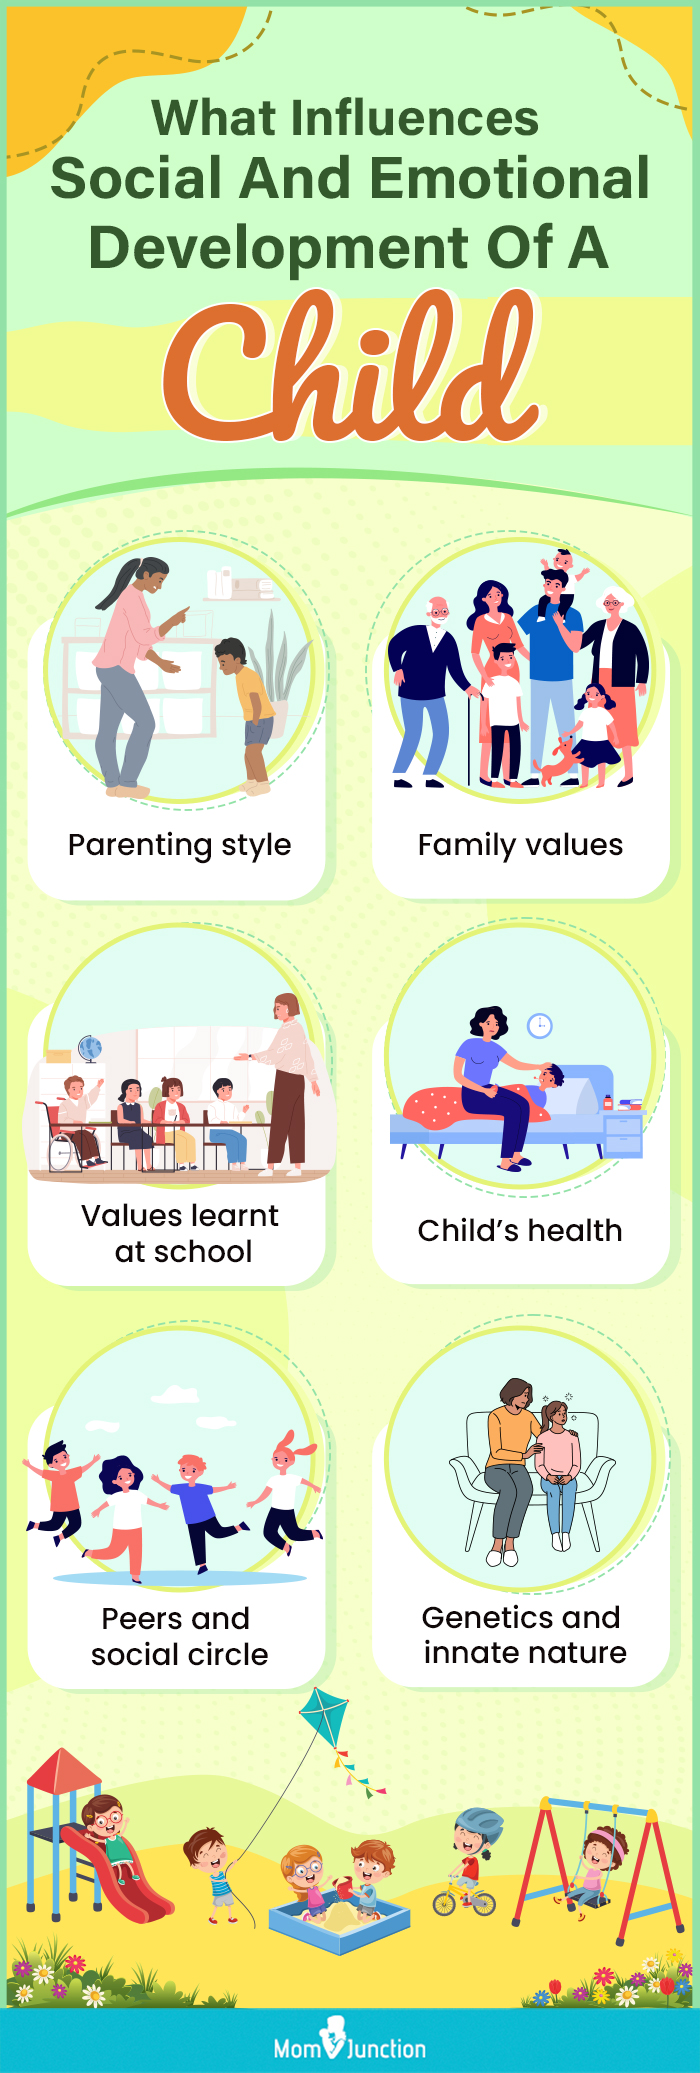 what influences social and emotional development of a child (infographic)